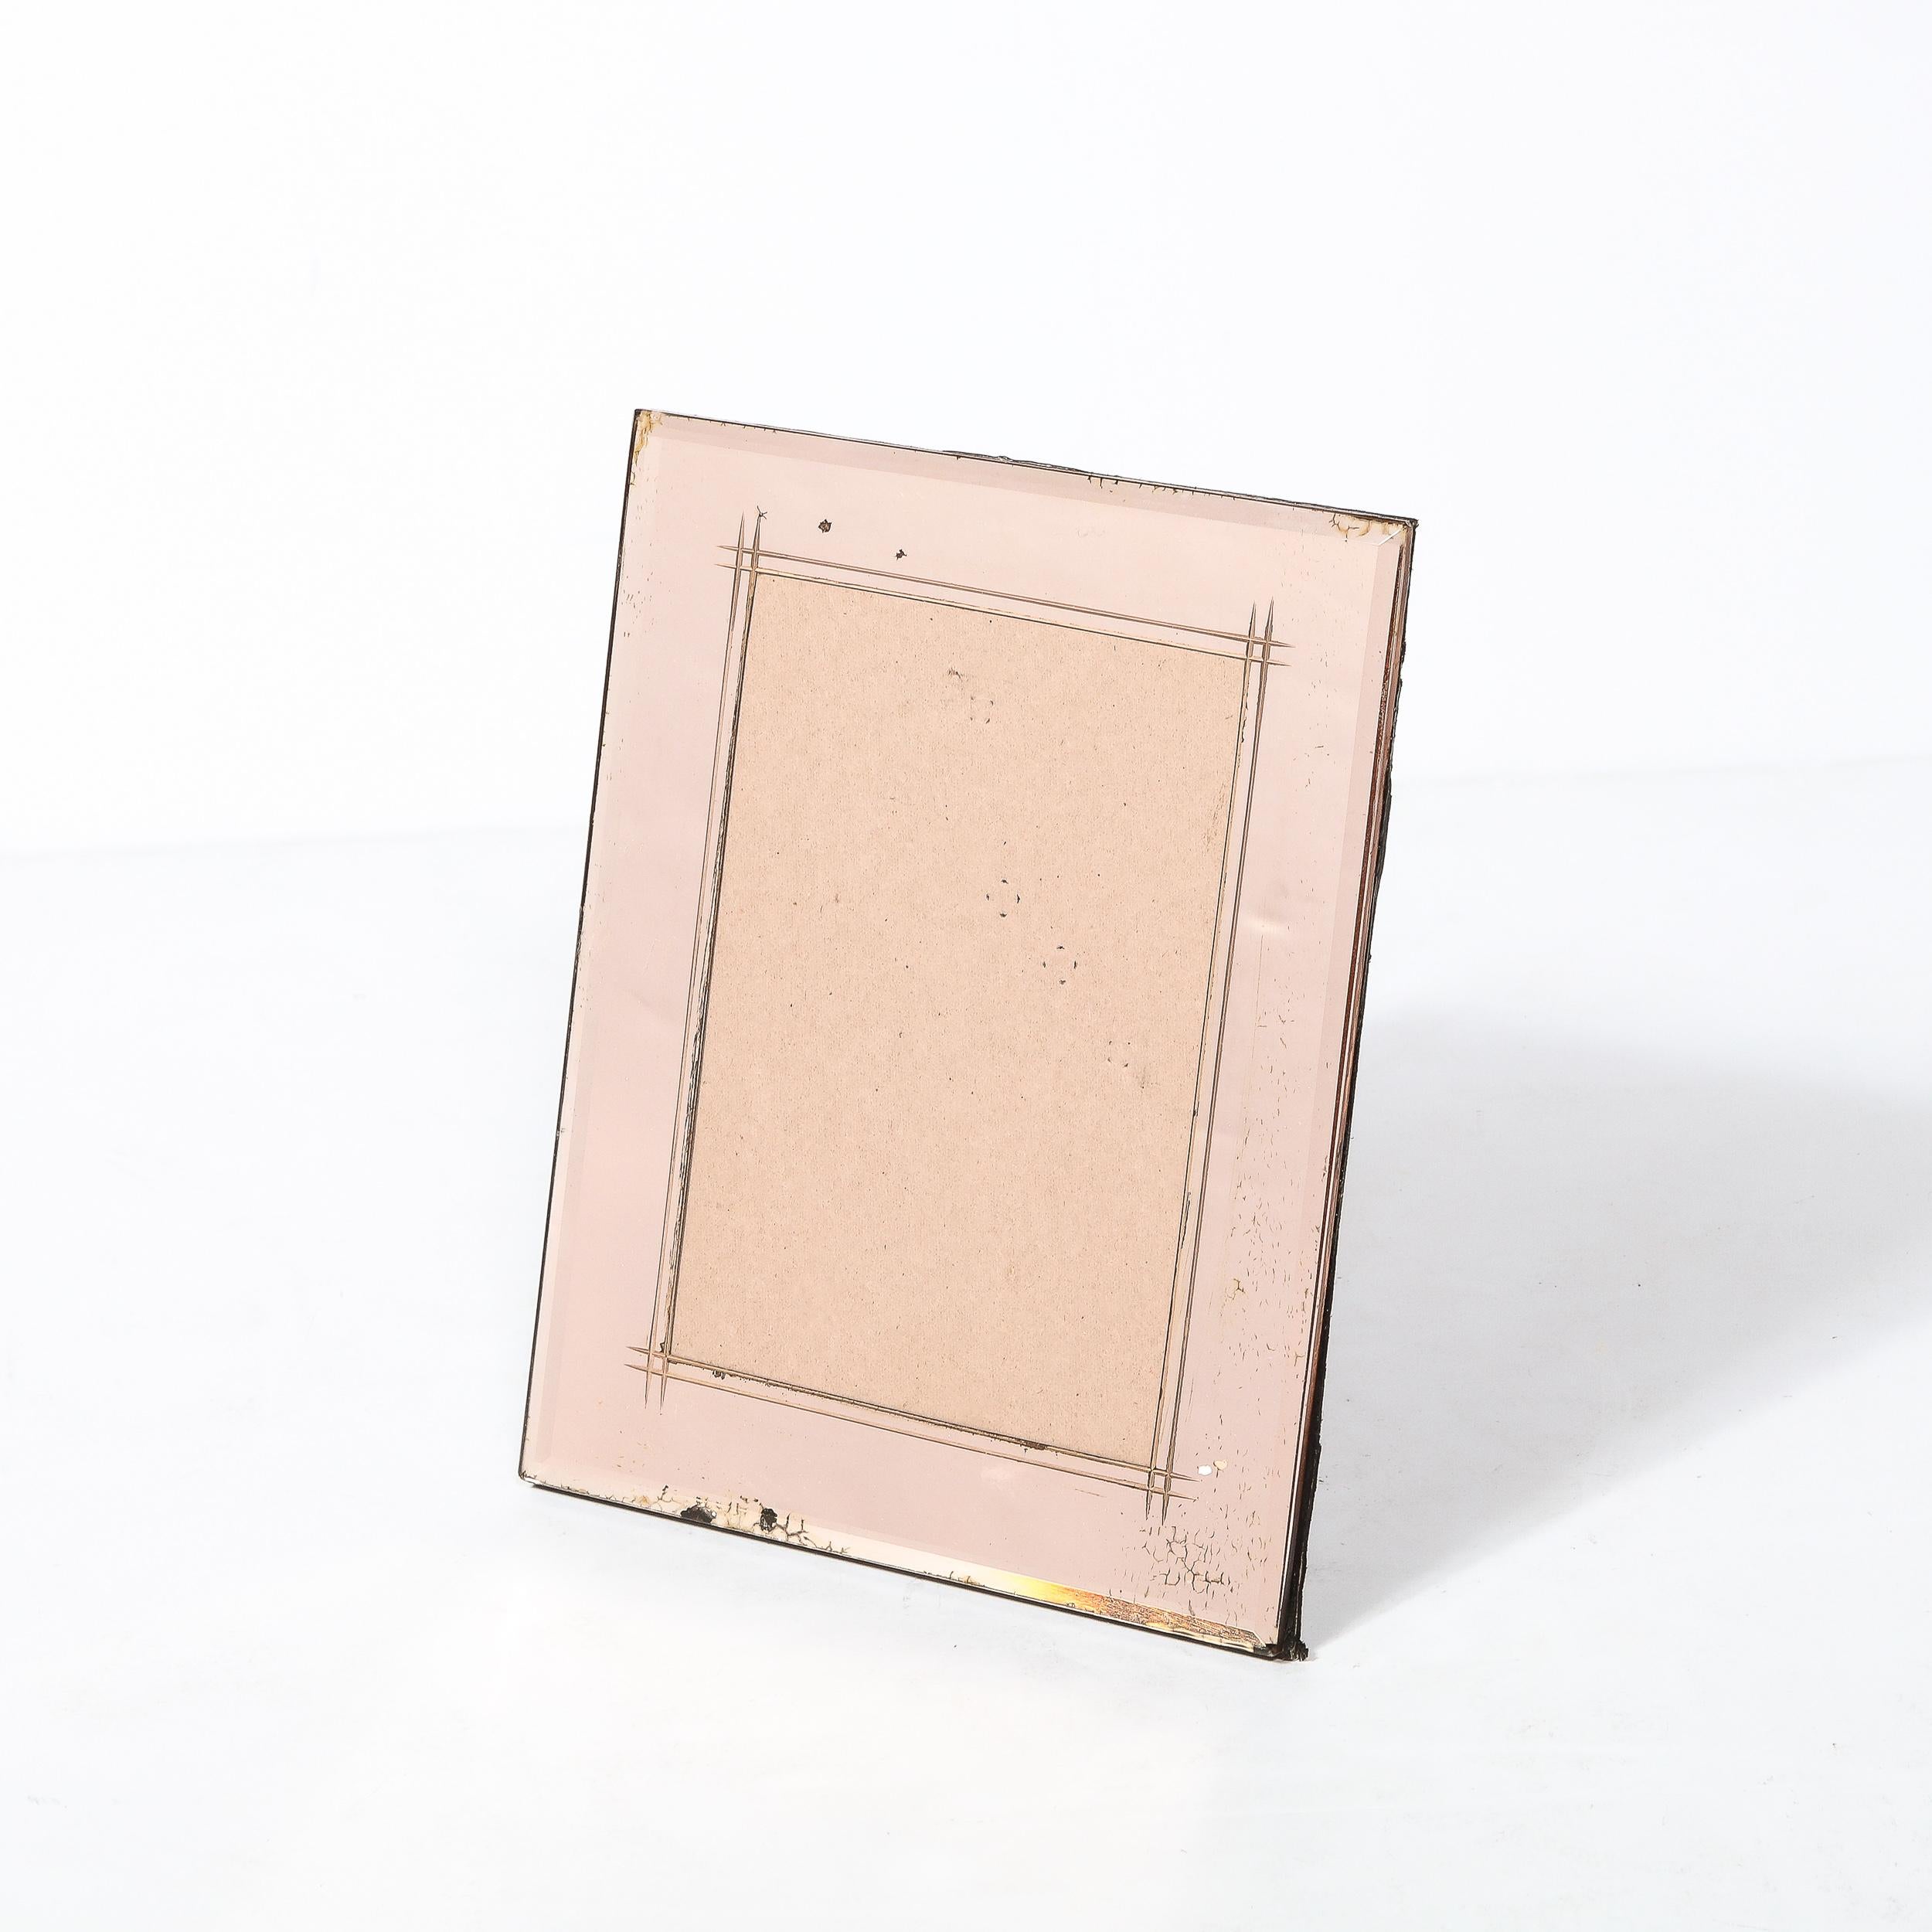 This picture frame is crafted in the United States, circa 1935, beautifully rendered Smoked Rose Glass. The frame is rectangular with Beveled Edge Detailing and utilizes reverse etching which draws the eyes towards the center of the piece and